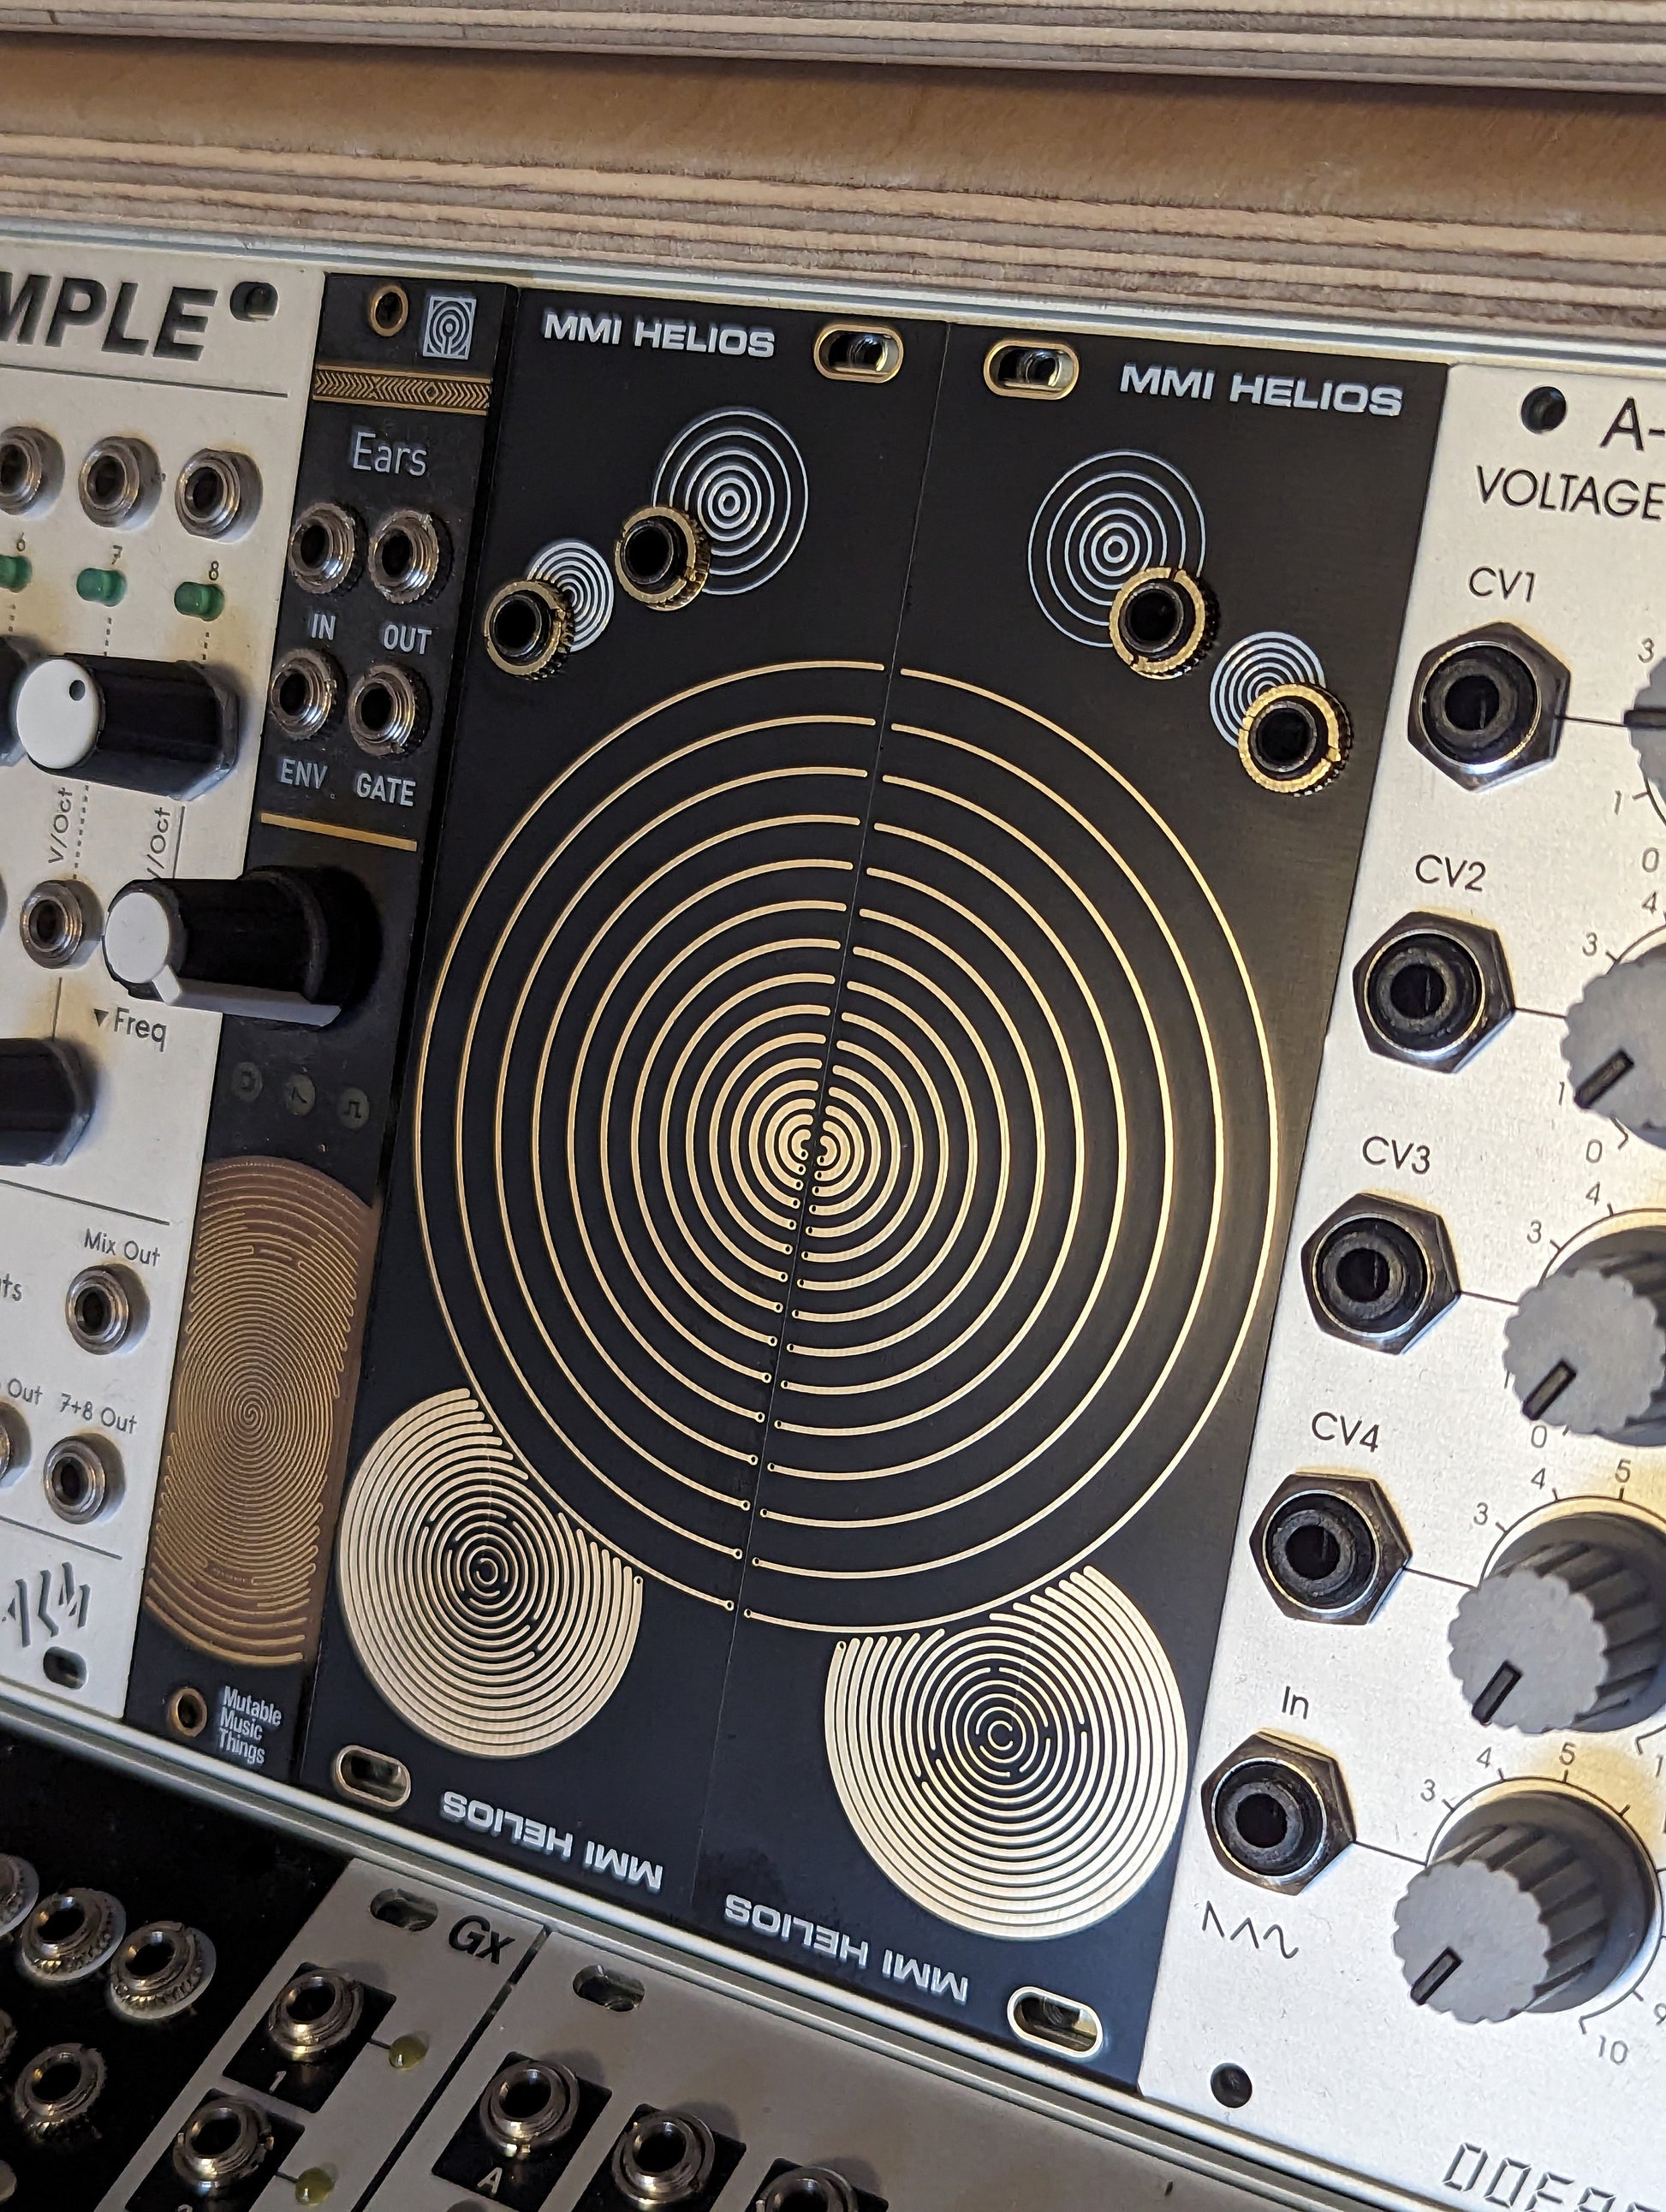 MMI Helios - passive gesture, touch and pressure controller for Eurorack and modular synthesizers in 8hp